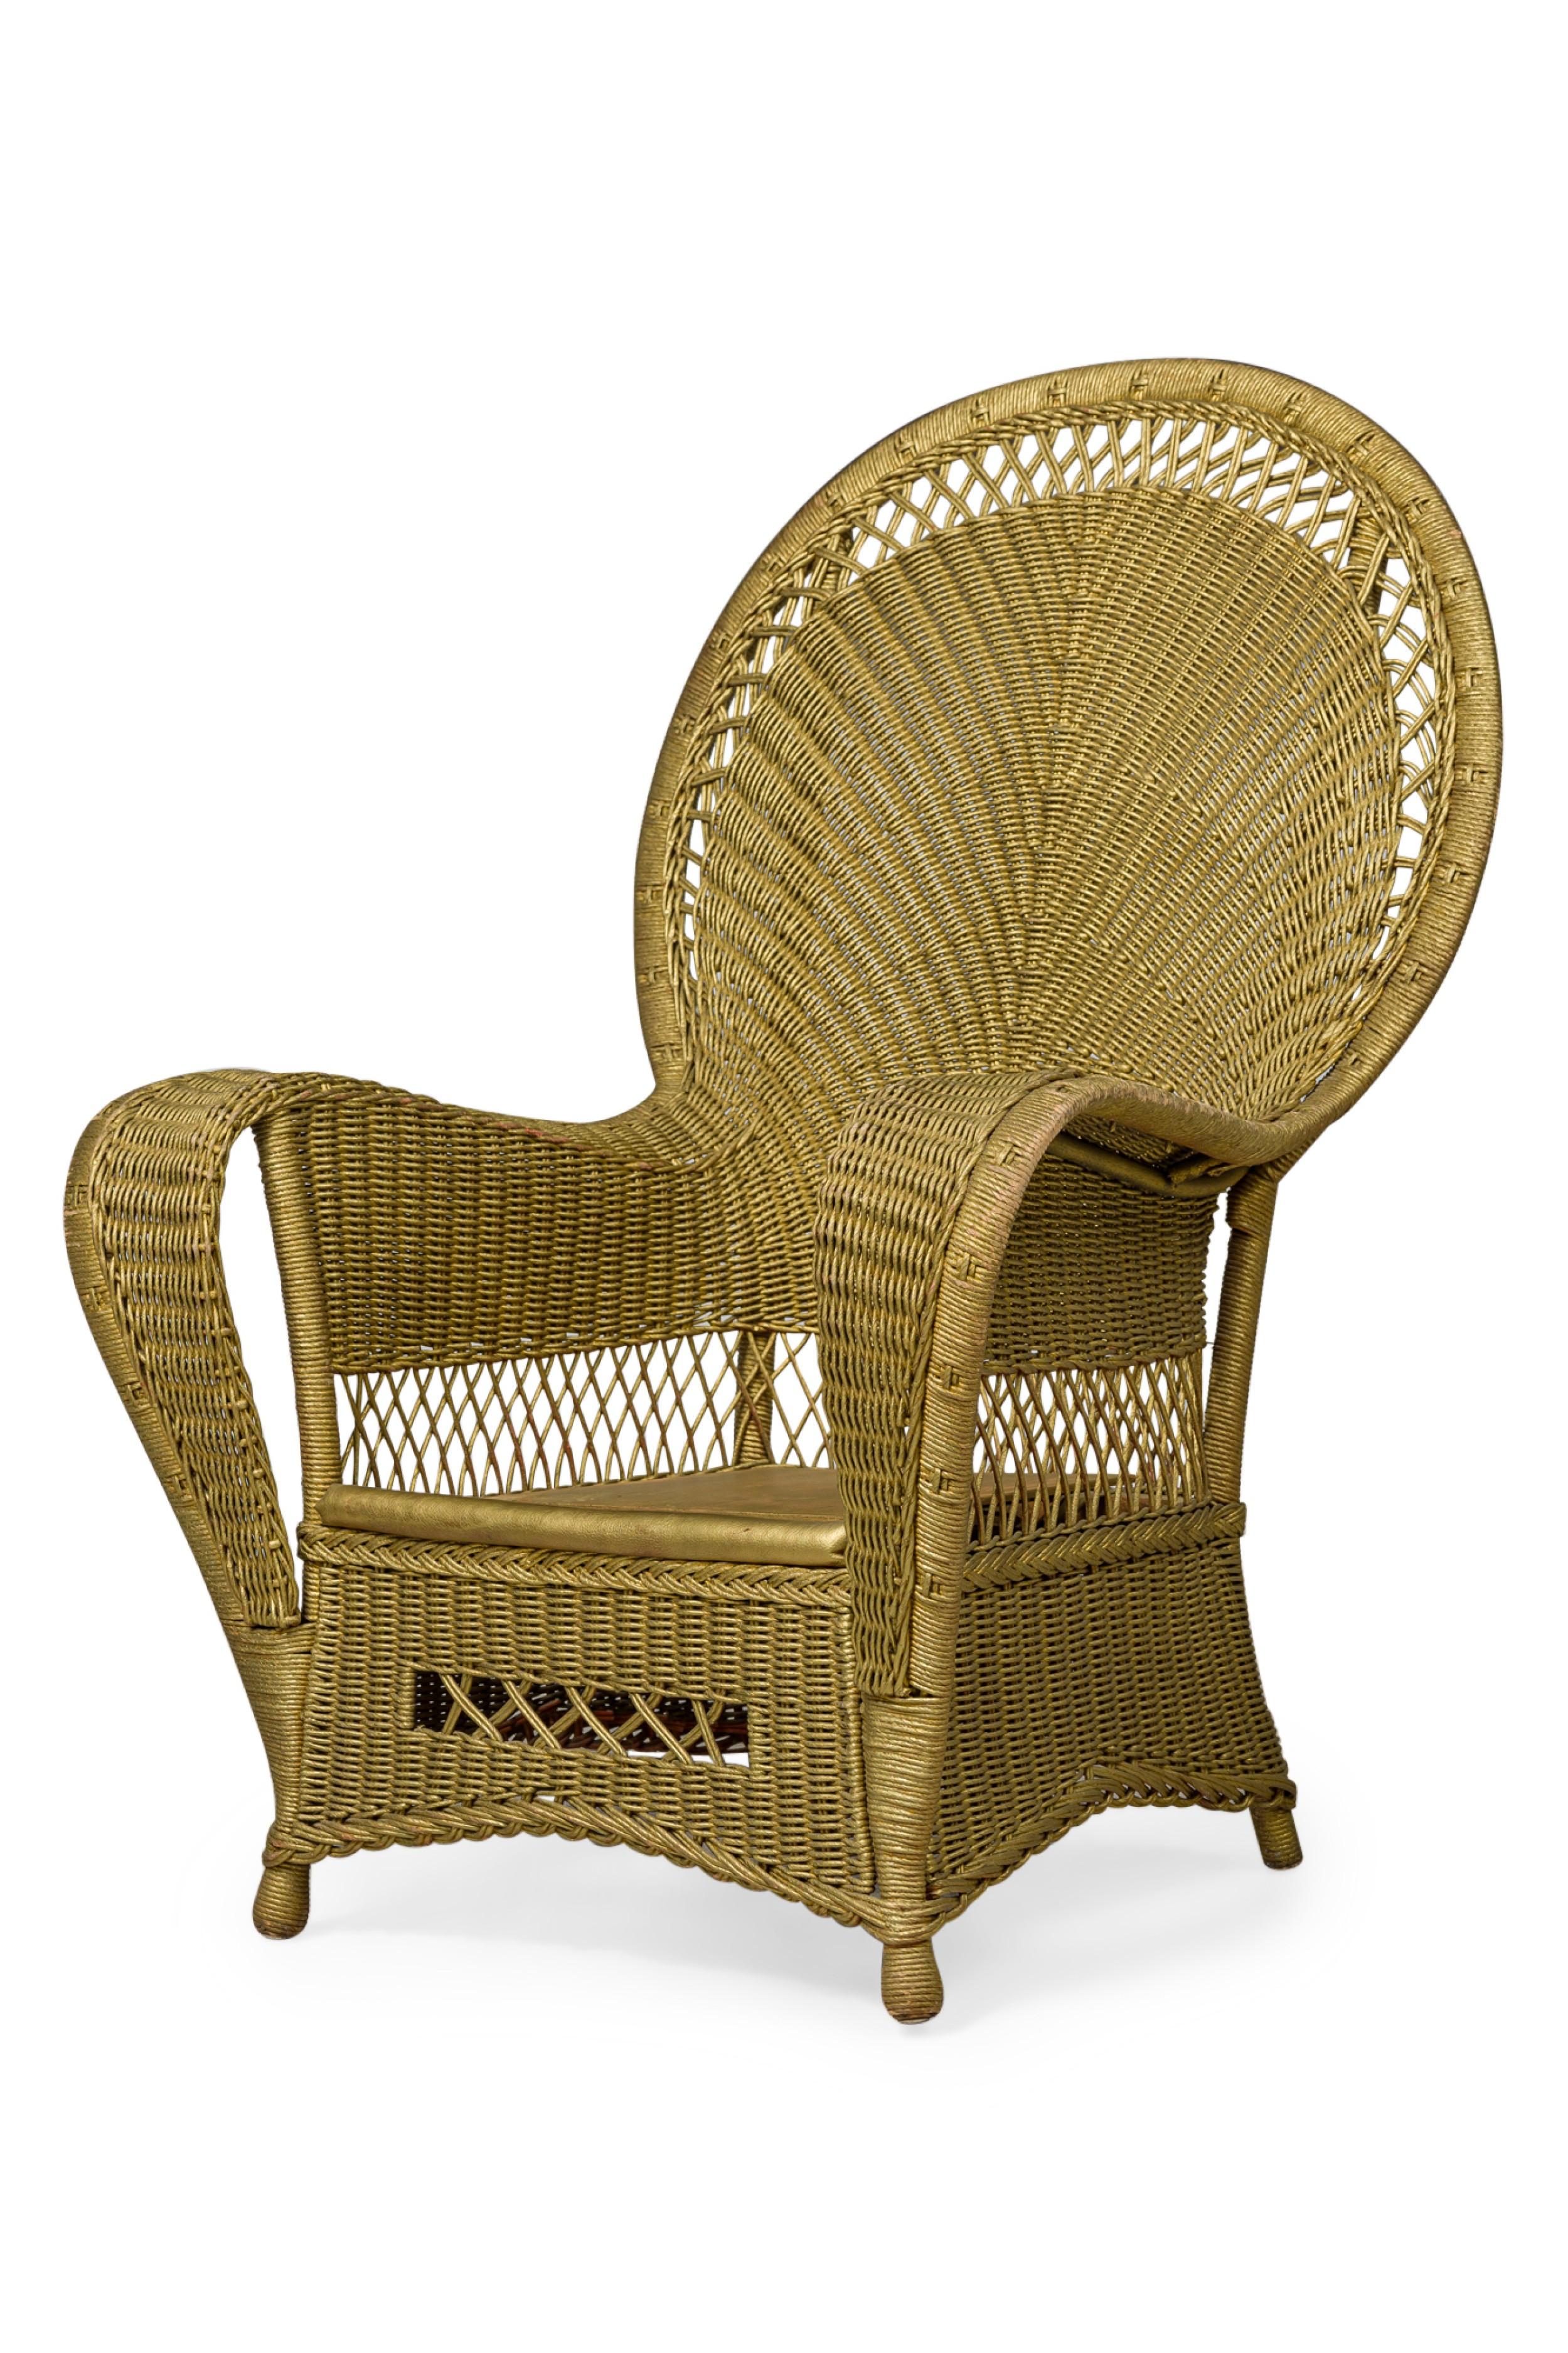 Fabric Pair of Similar Art Deco Gold Painted Paper Cord Wicker Armchairs For Sale